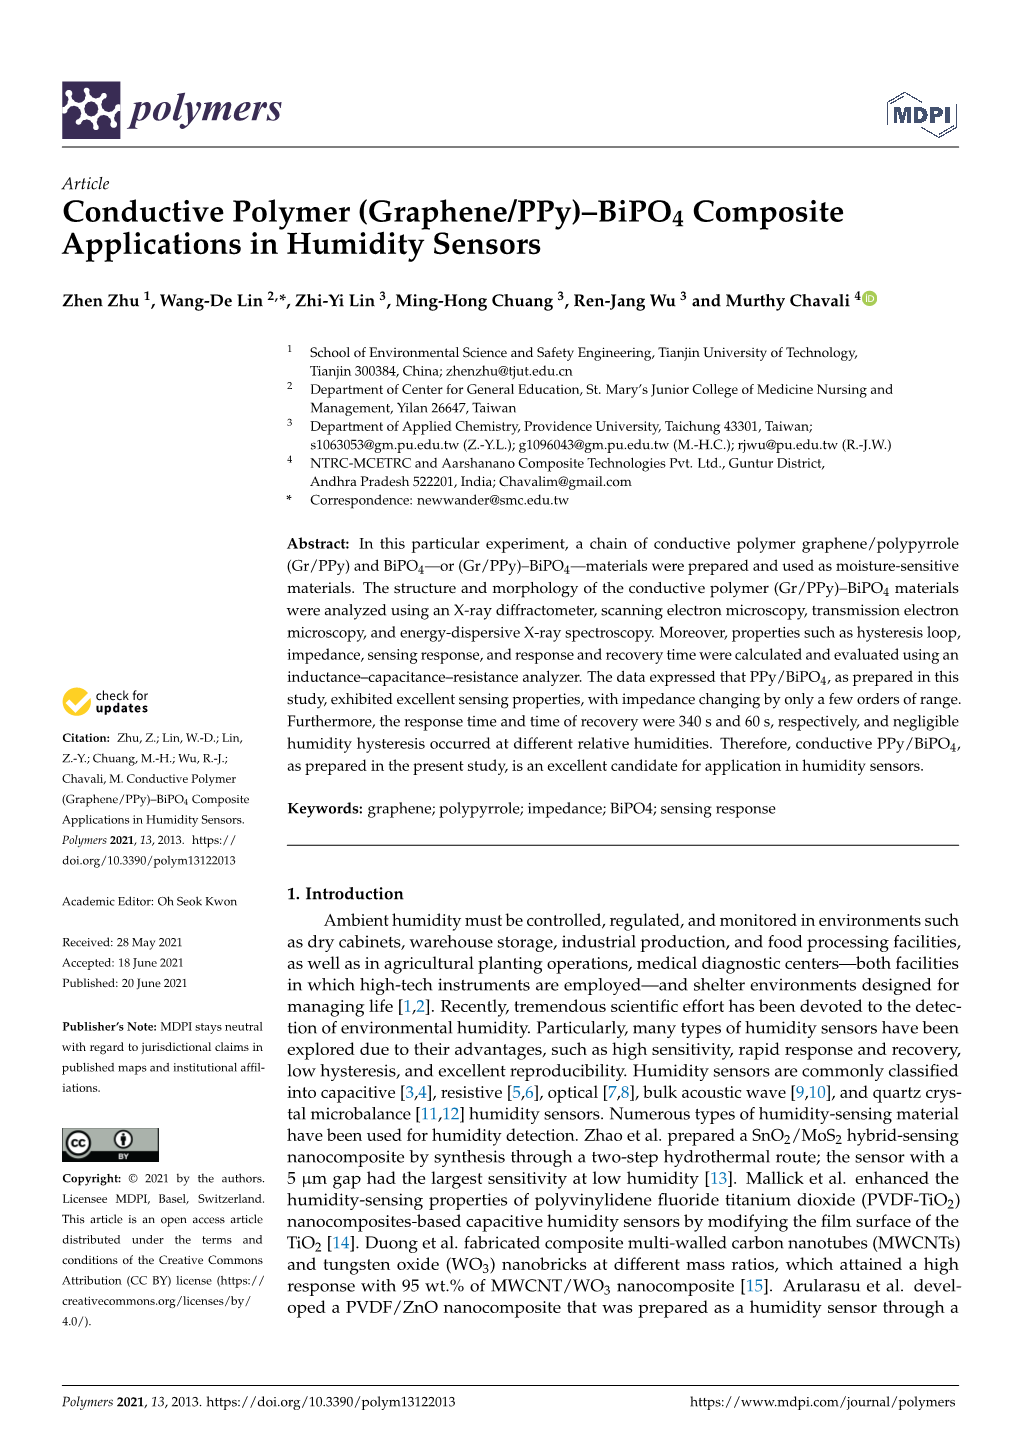 Conductive Polymer (Graphene/Ppy)–Bipo4 Composite Applications in Humidity Sensors